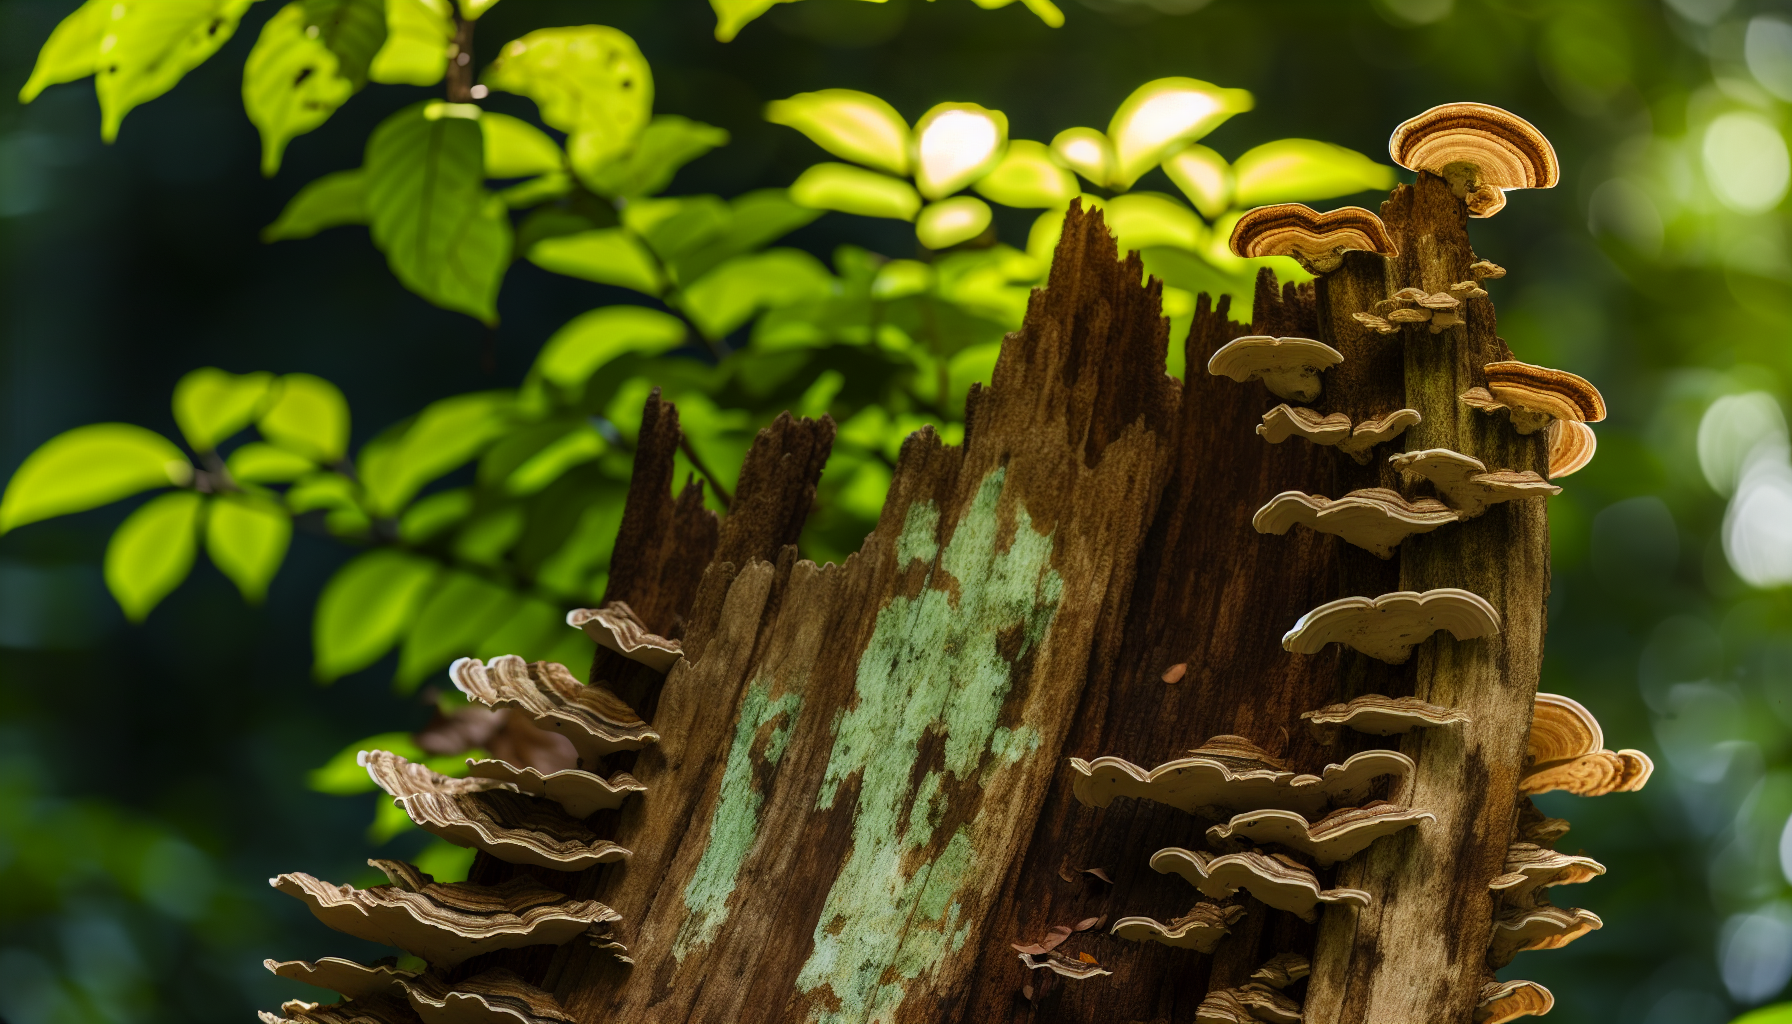 Fungus growth on a tree trunk with green leaves in the background